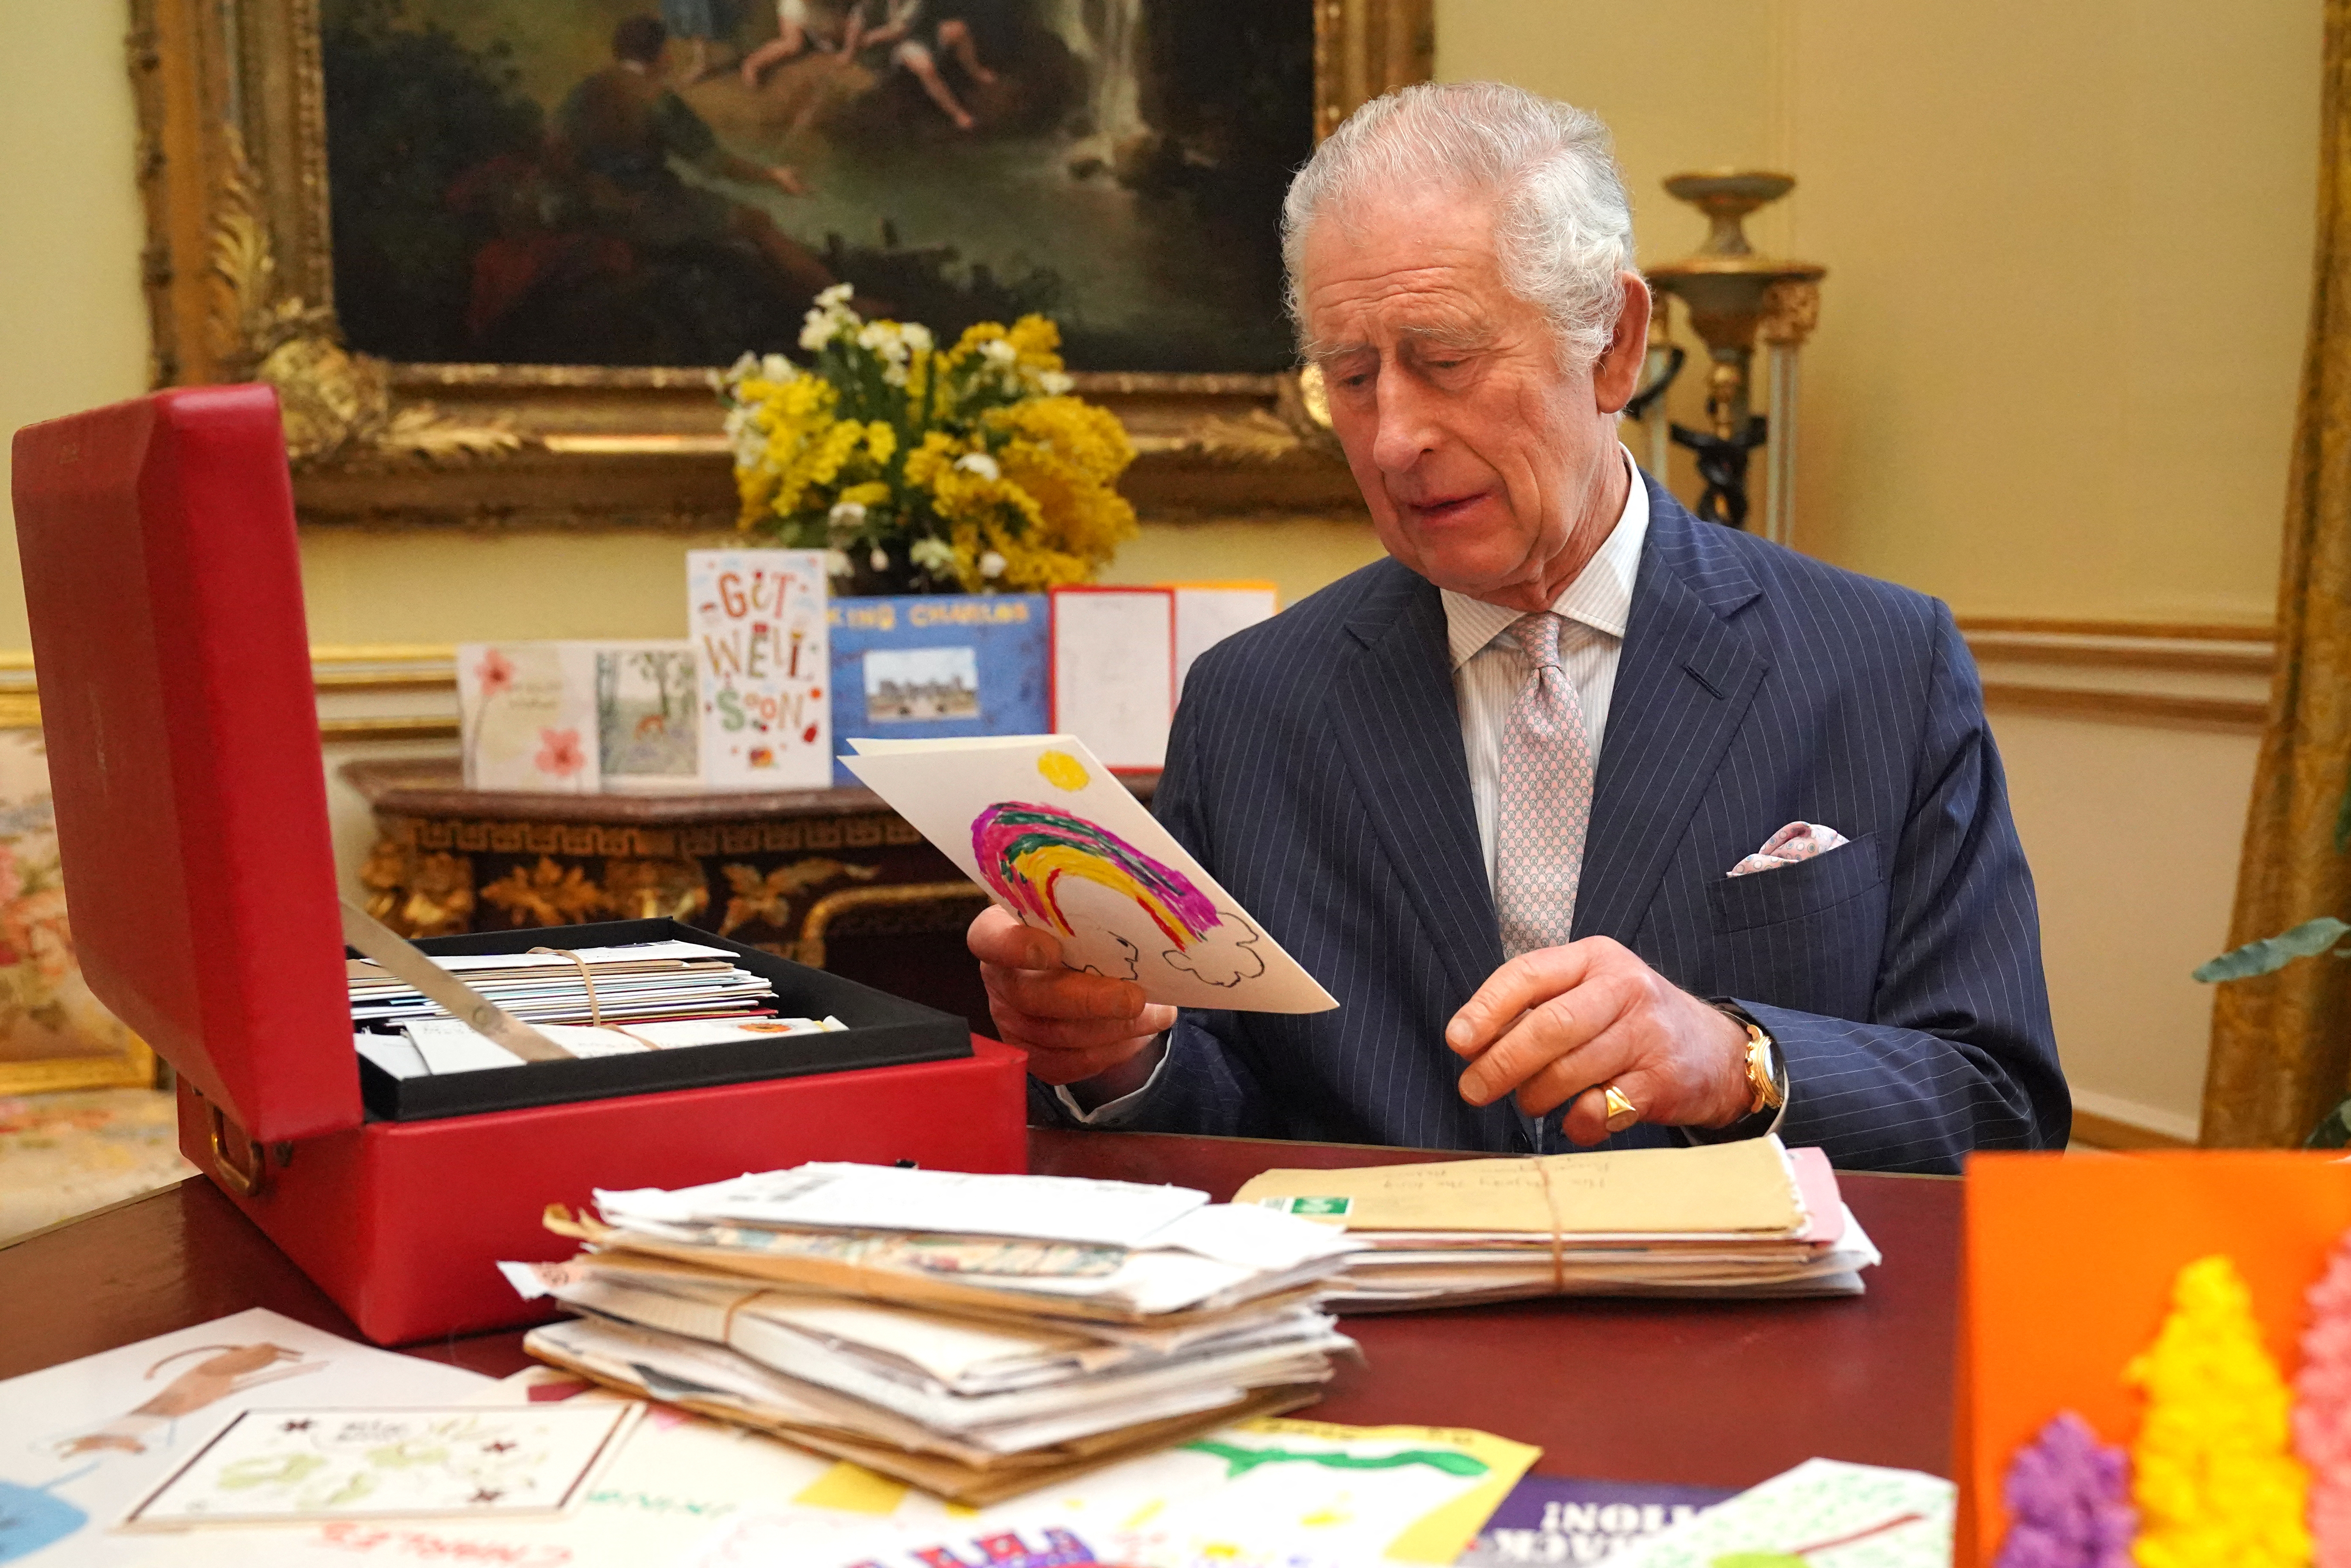 King Charles III photographed reading cards and messages from supporters following his cancer diagnosis, on February 21, 2023 | Source: Getty Images